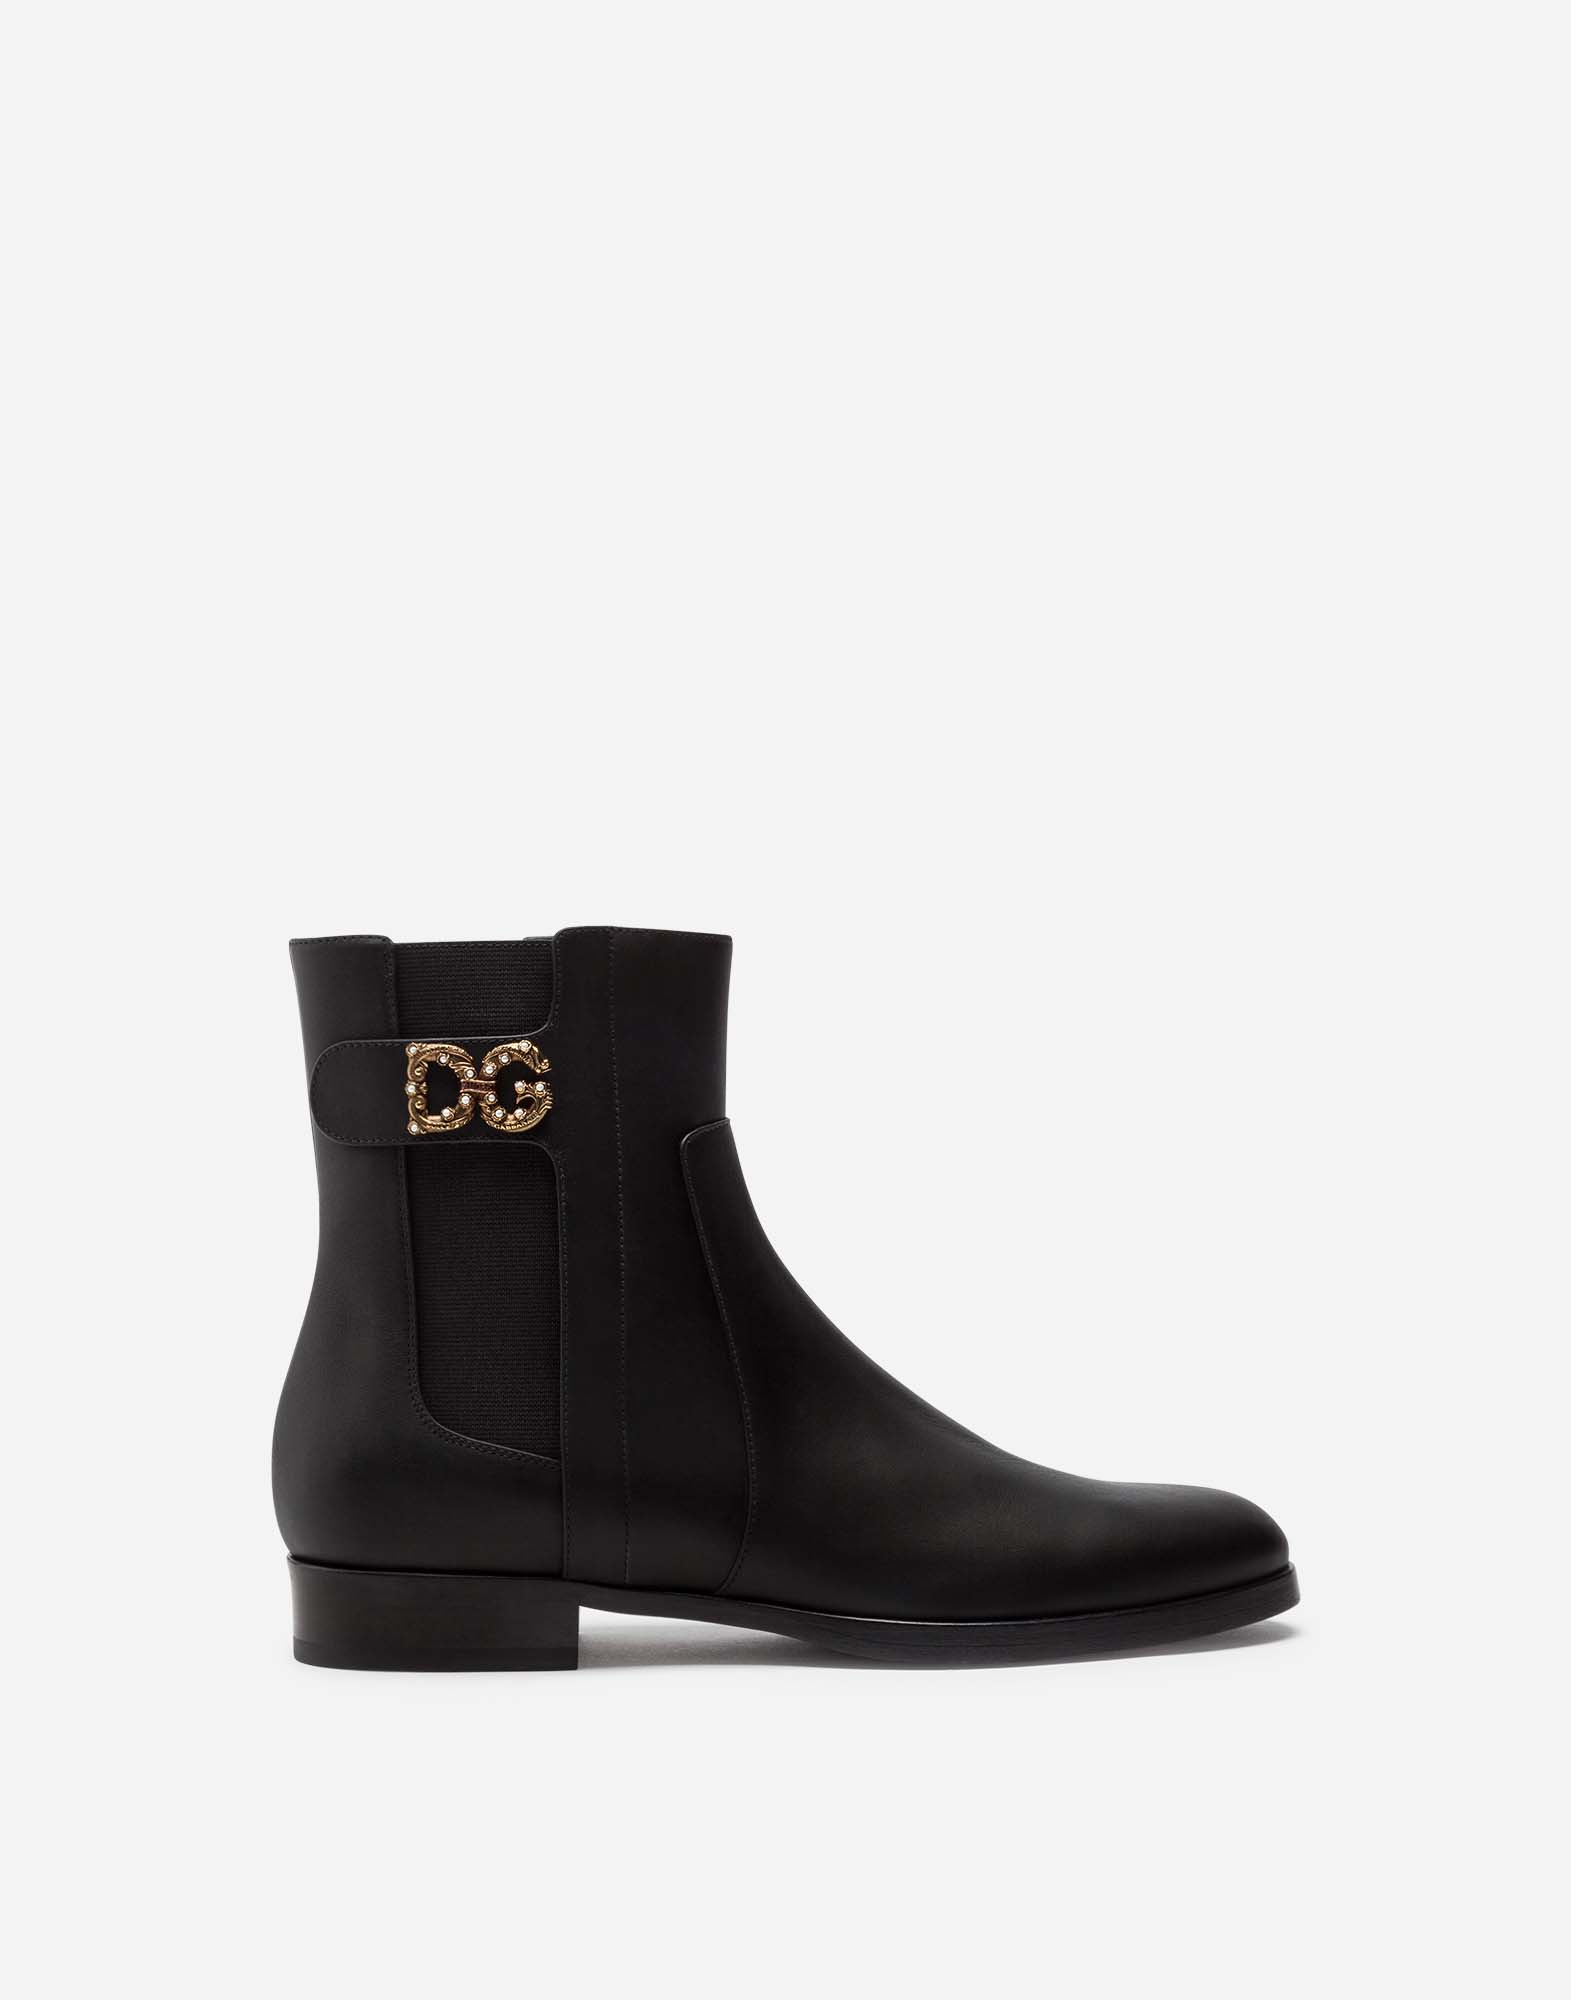 CALFSKIN NAPPA CHELSEA BOOTS WITH DG LOGO